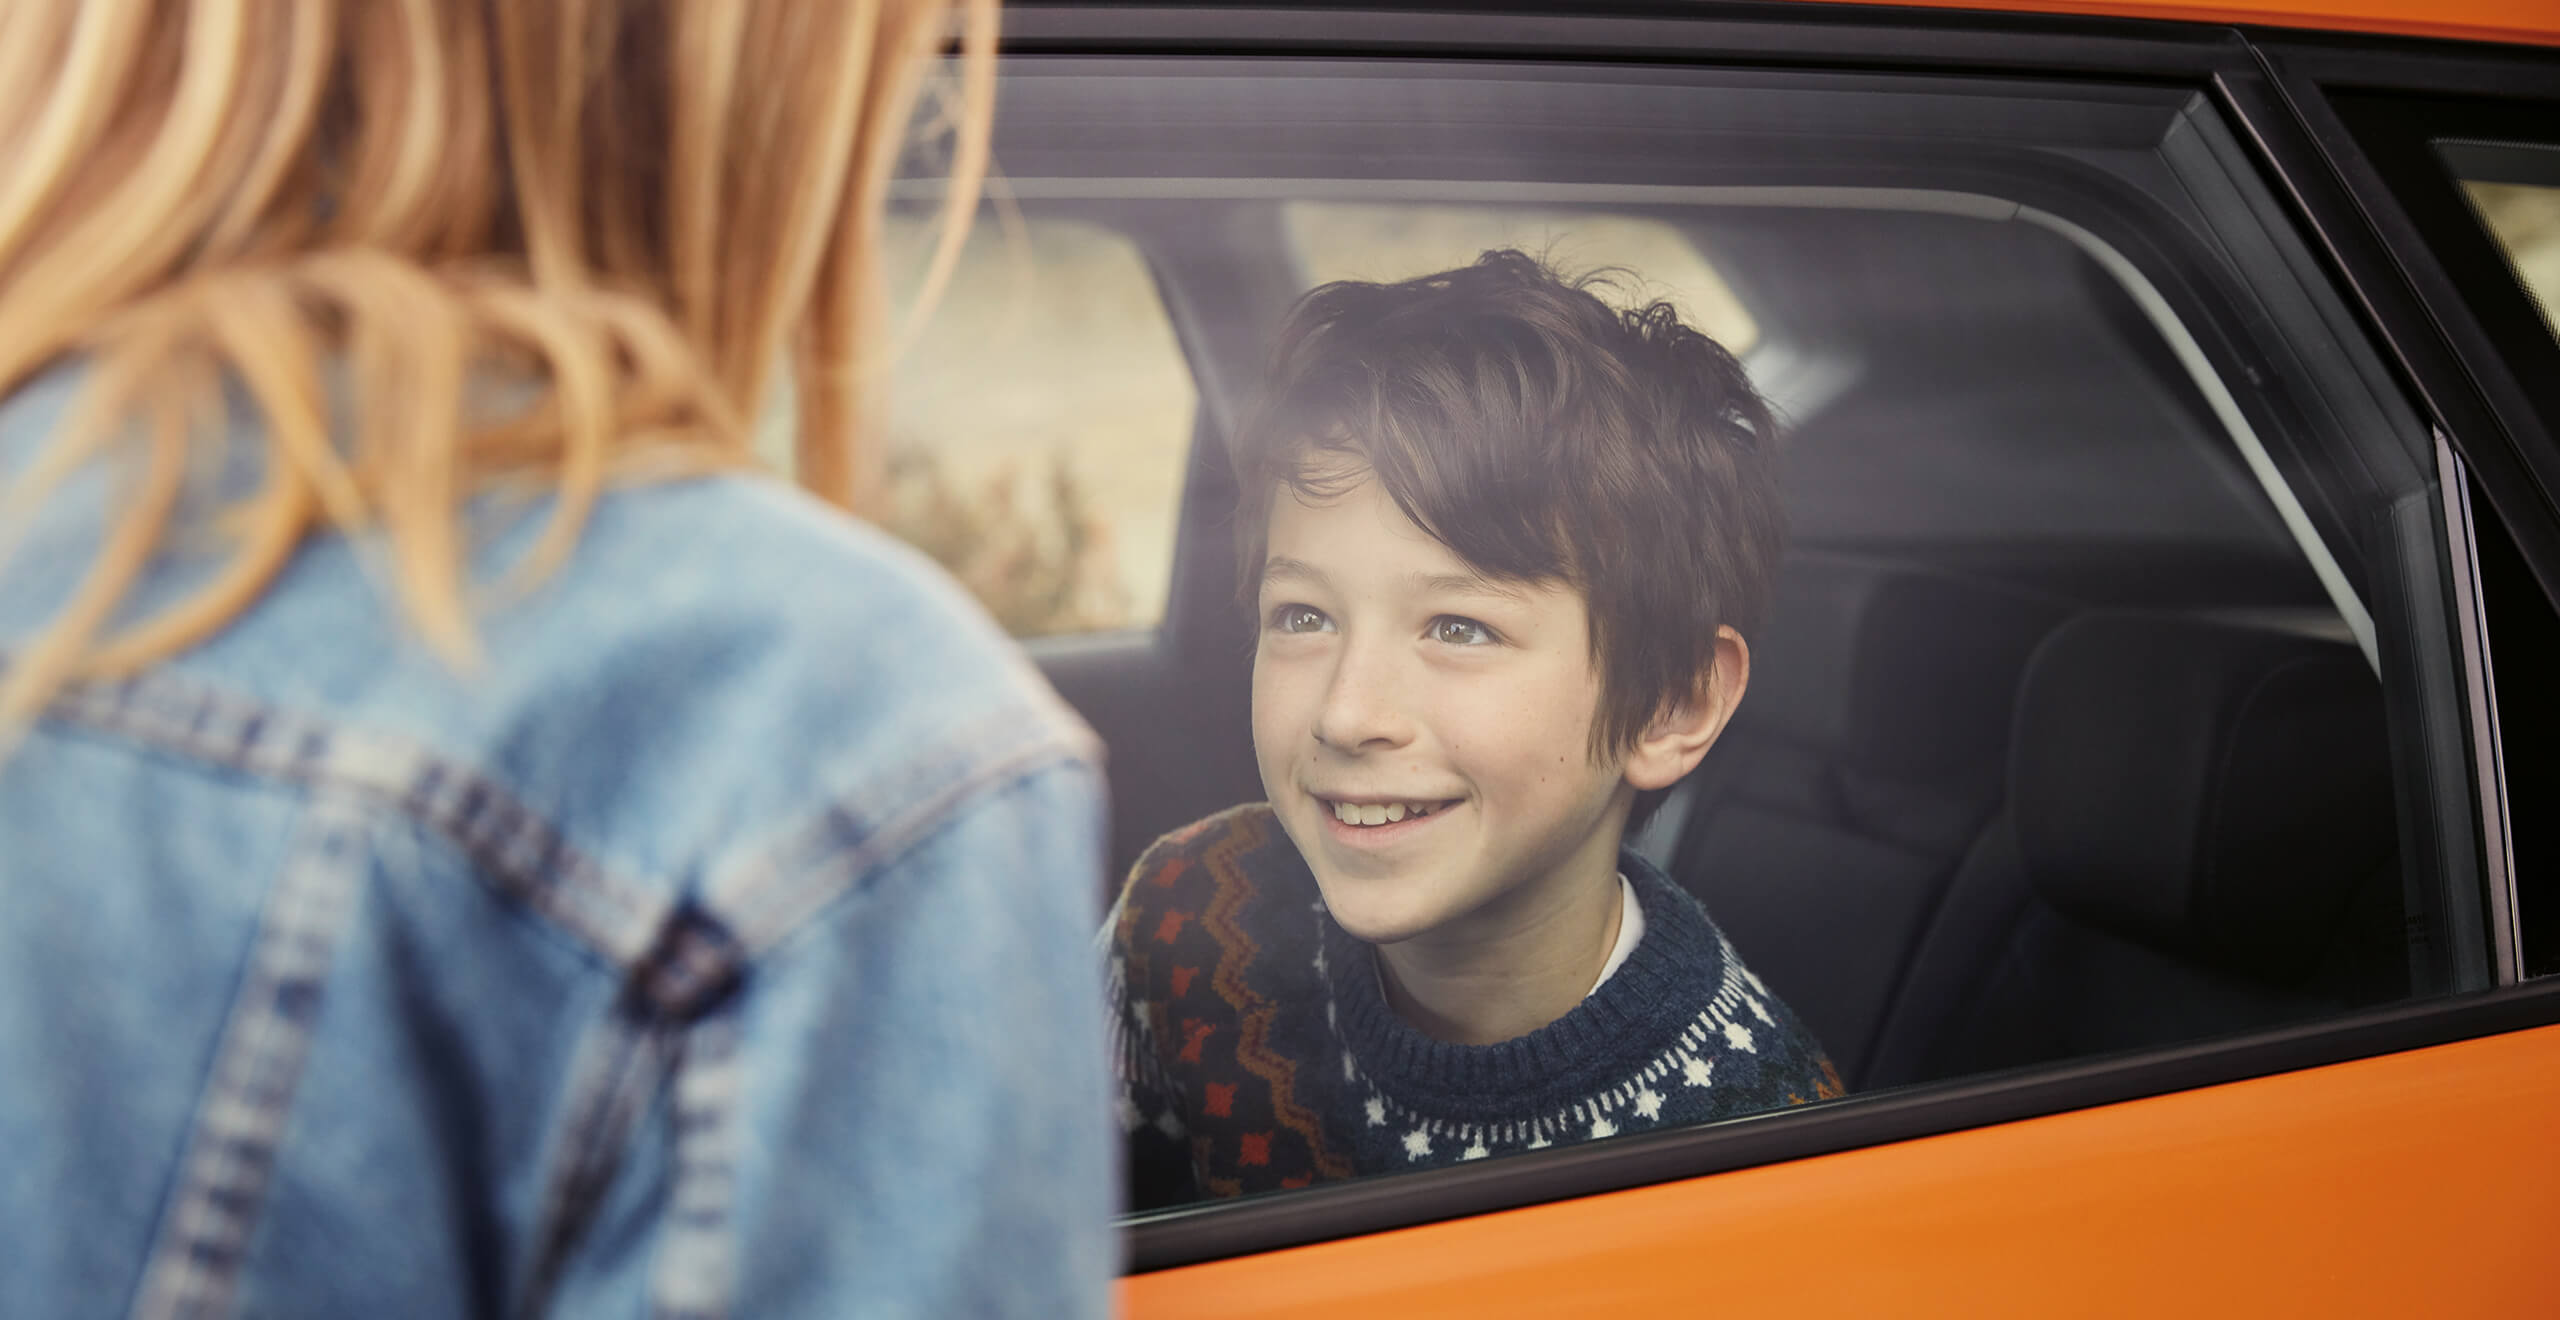 SEAT Service and maintenance – child looking at a woman from the inside of a new car